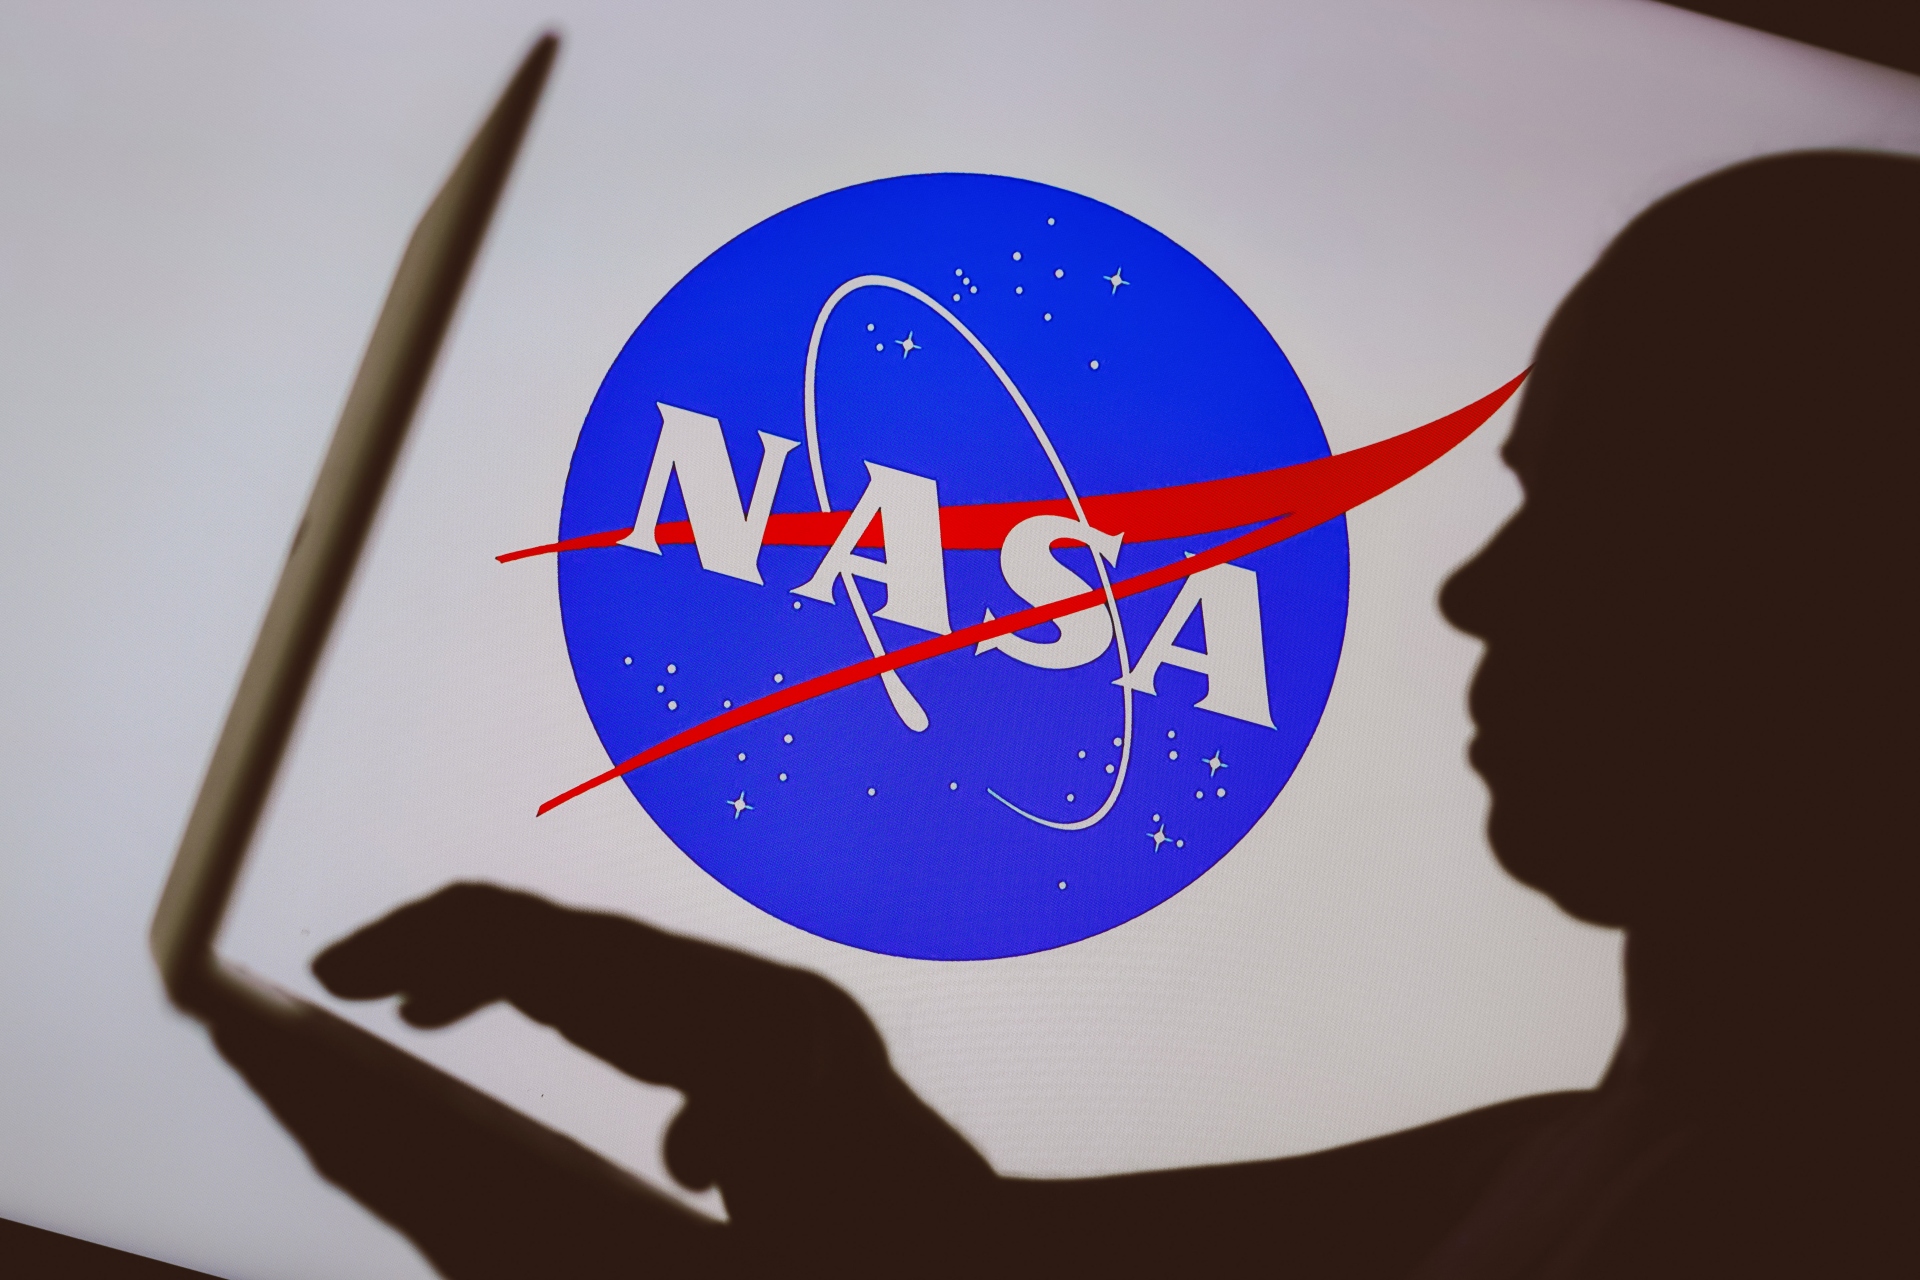 How much do you know about NASA?